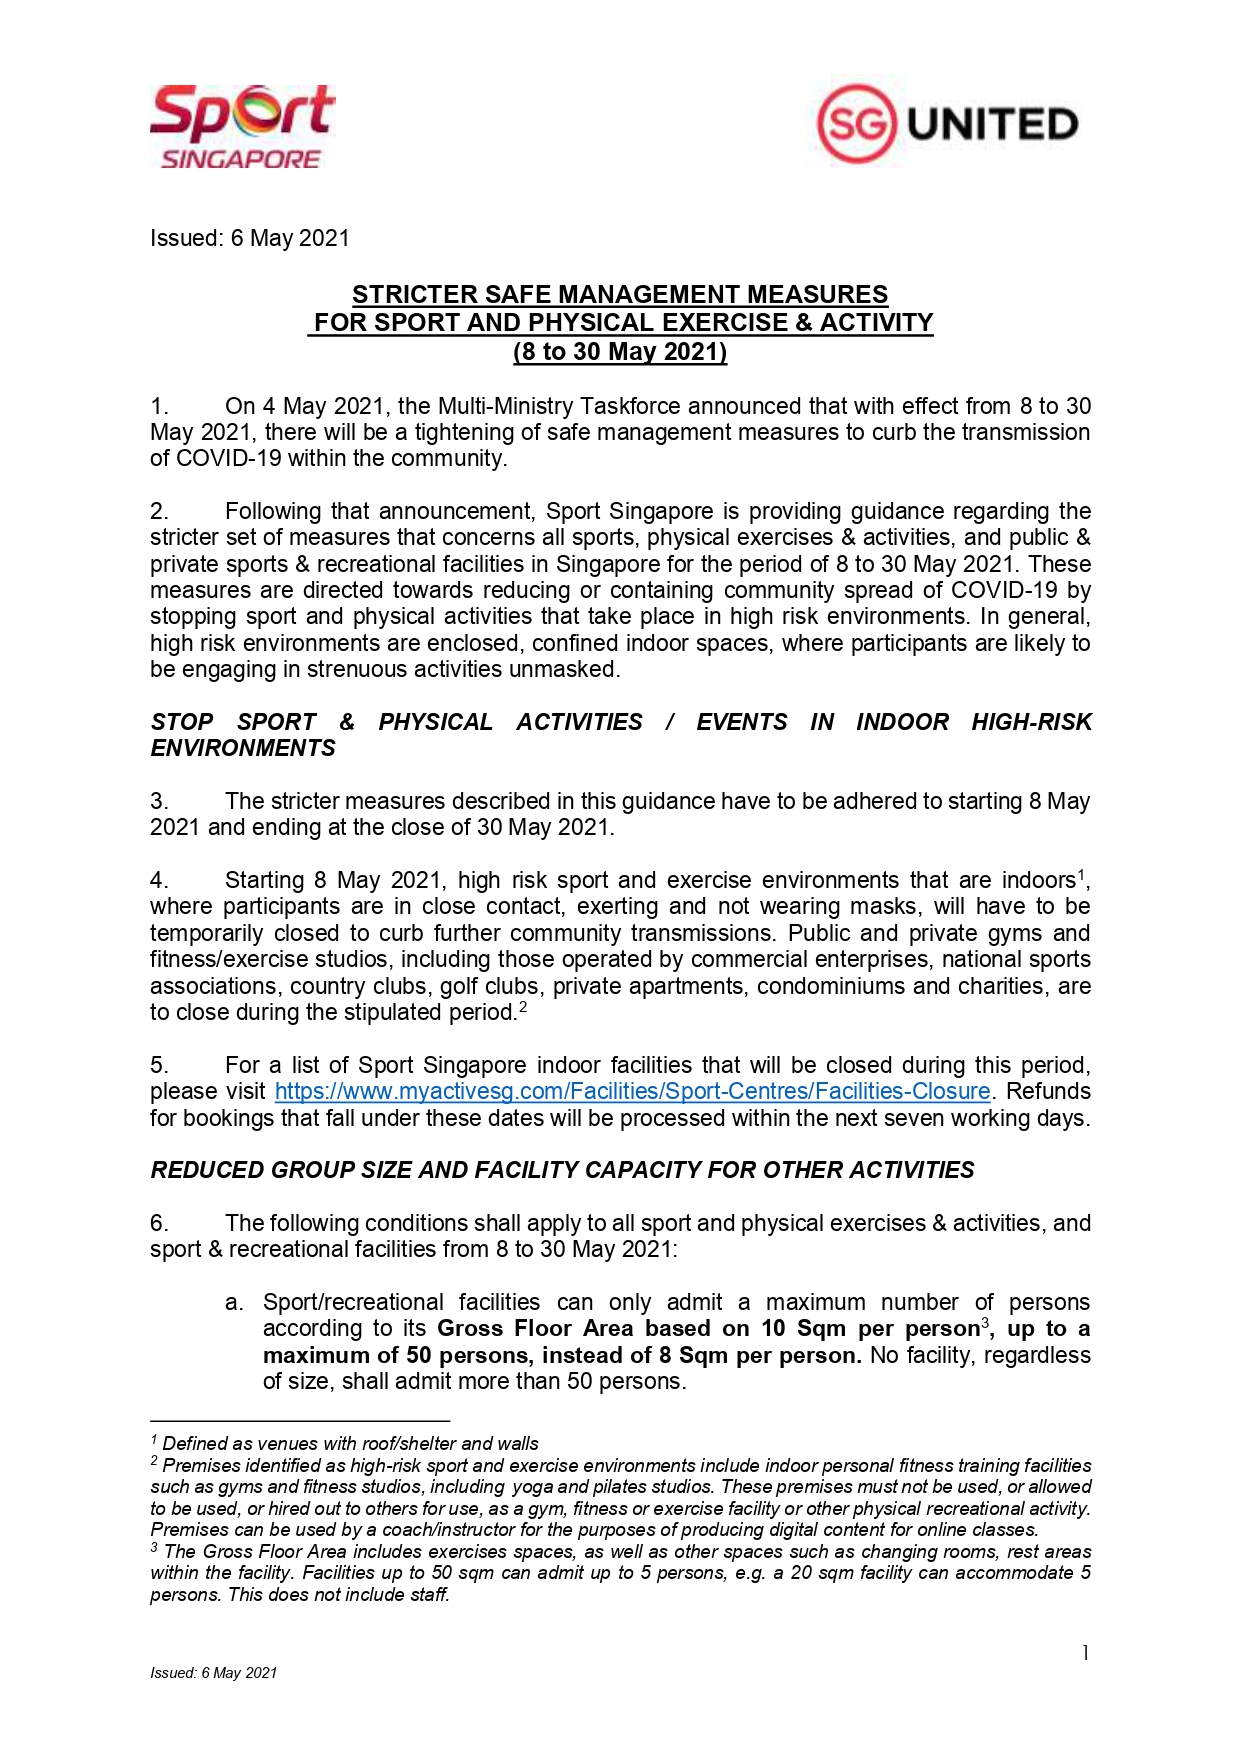 Stricter Safe Management Measures For Sport And Physical Exercise and Activity (8 to 30 May 2021) (2)_pages-to-jpg-0001